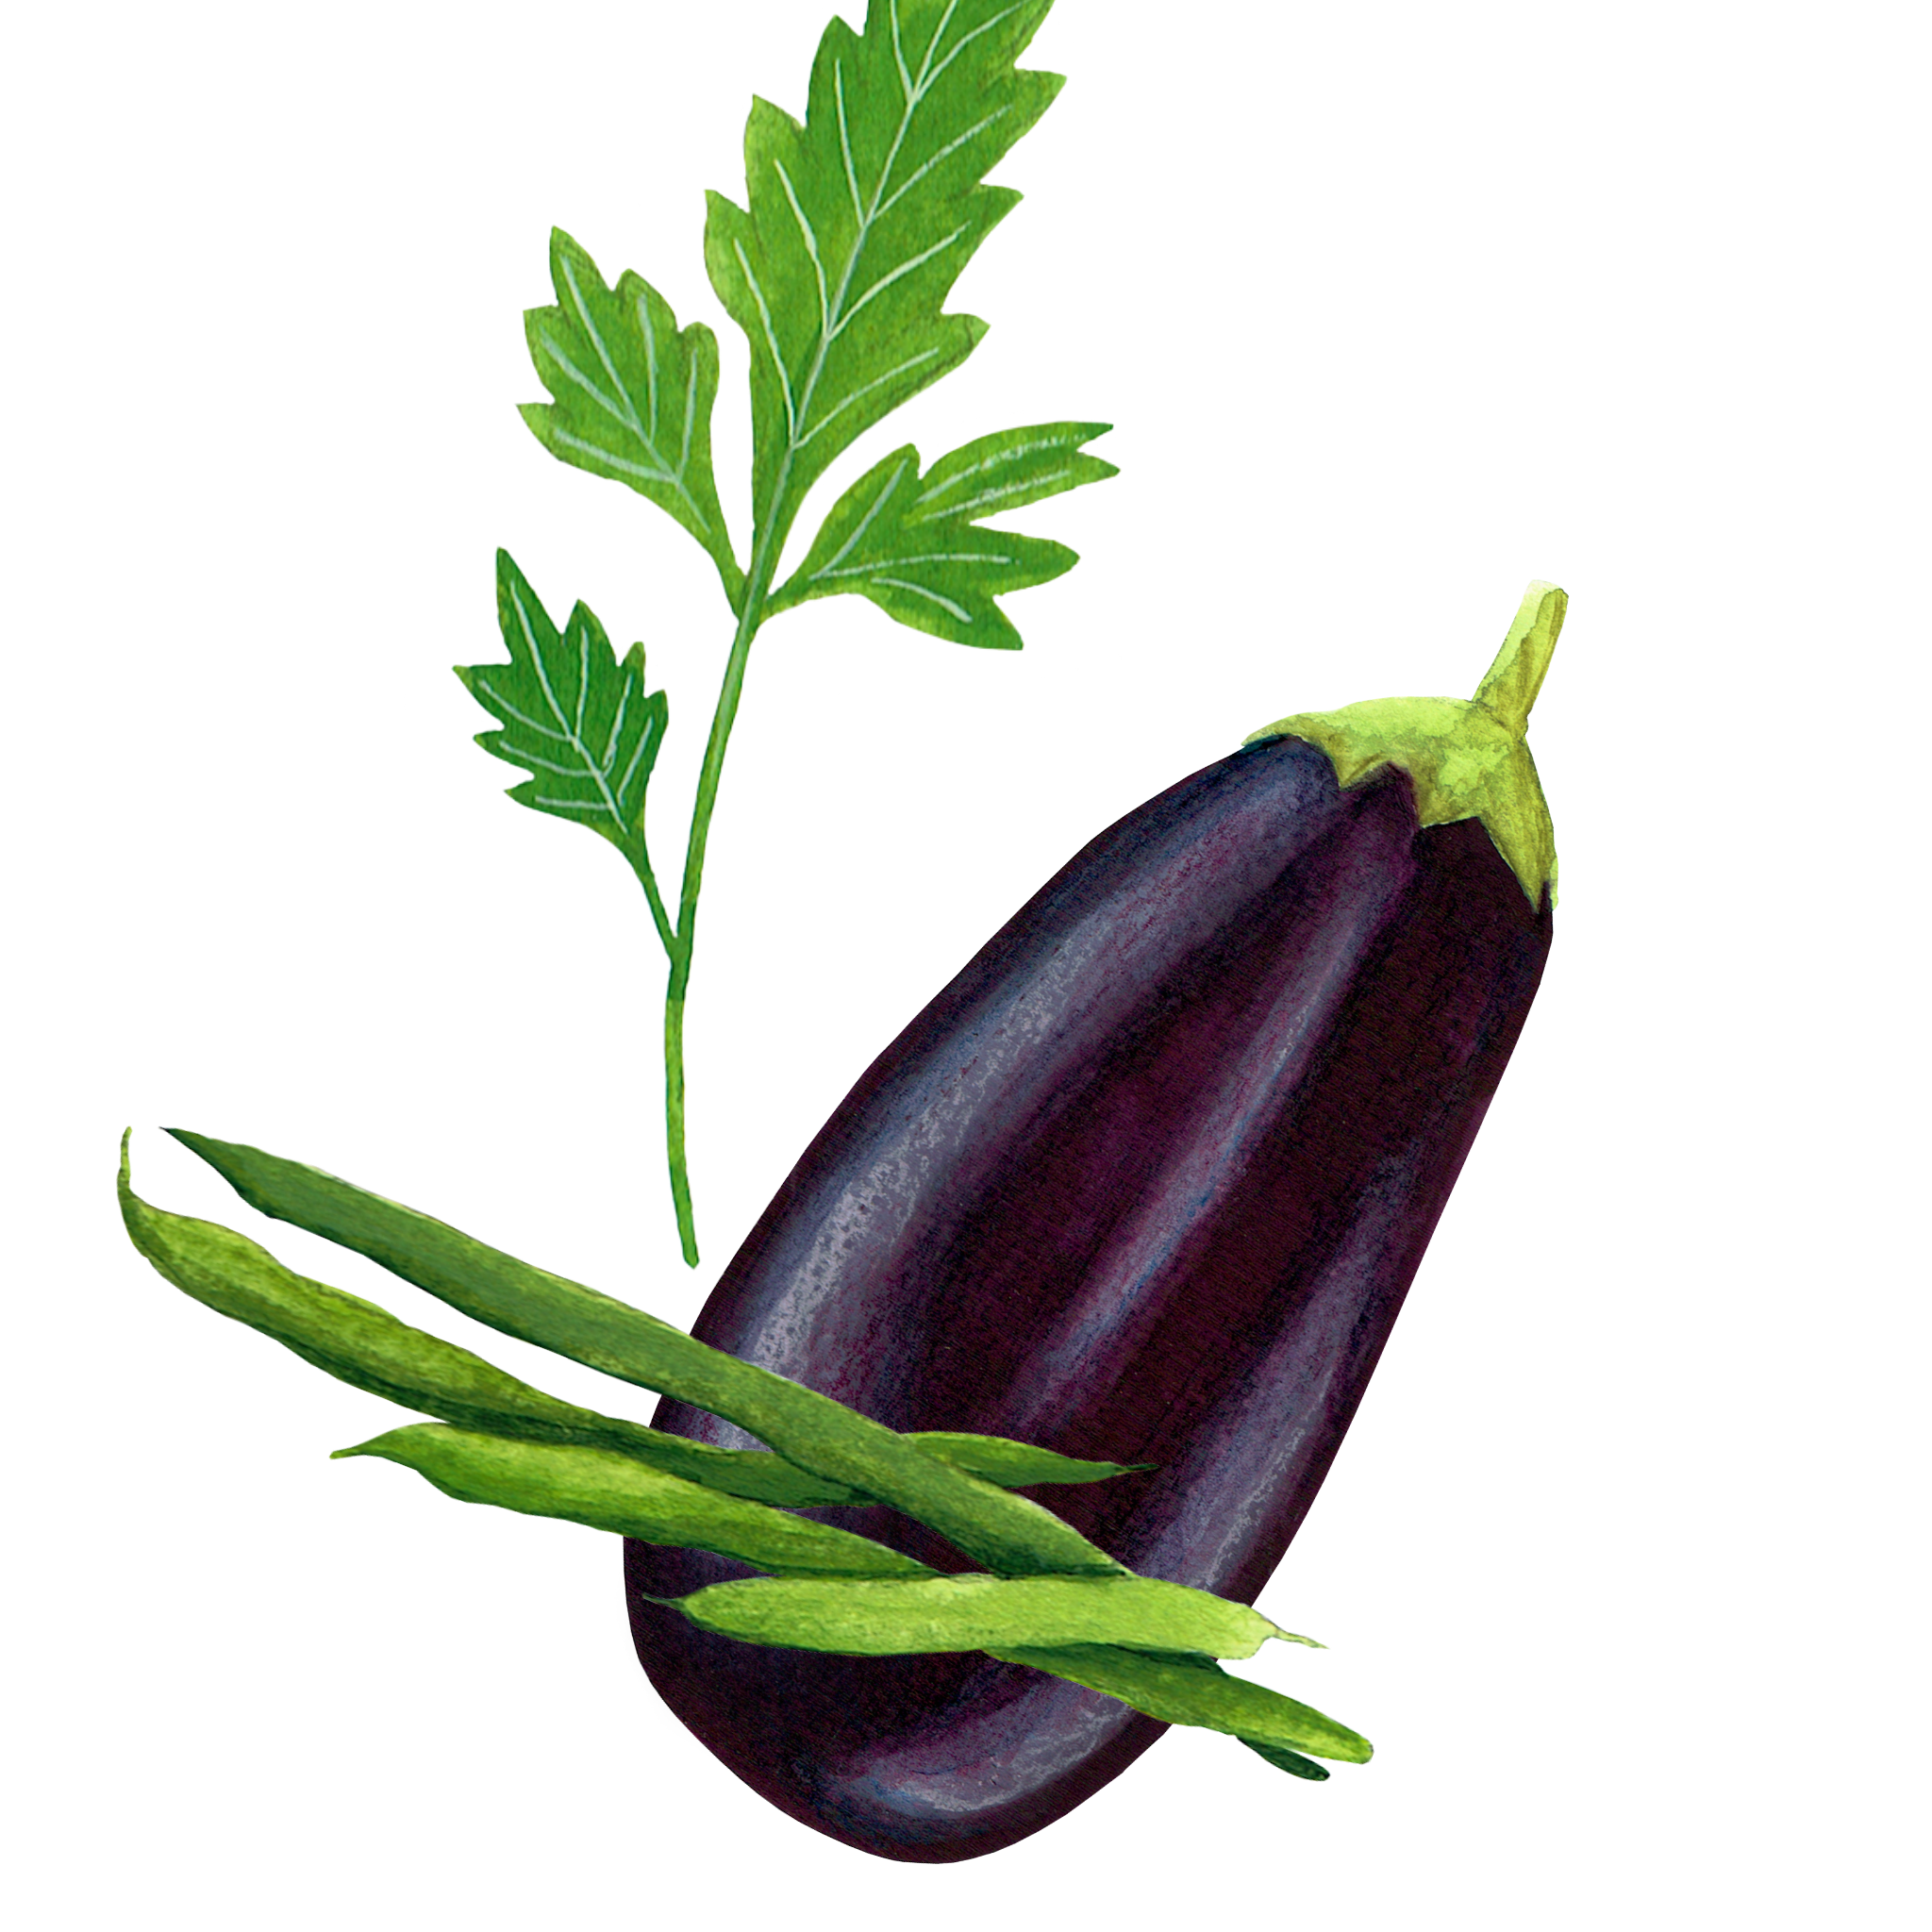 Drawing of an eggplant, beans and herbs